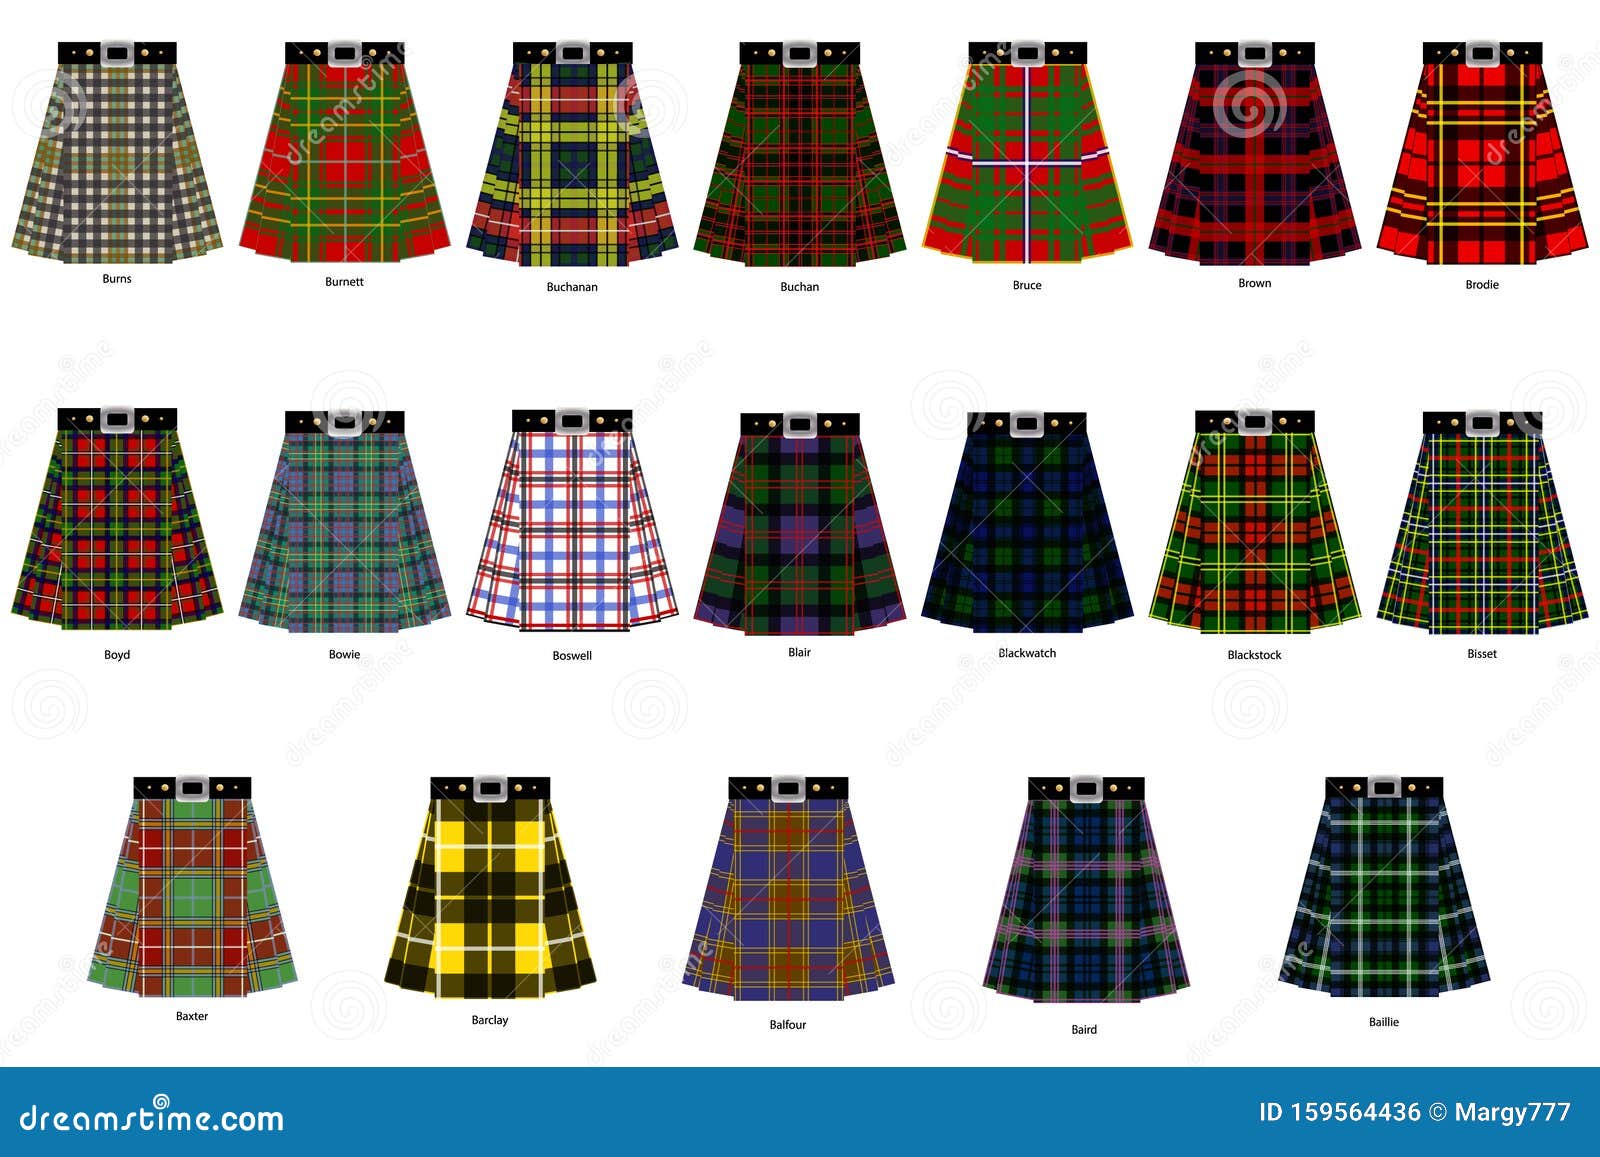 Images Of Kilts Or Skirts From Different Clan Tartans. Simplified ...